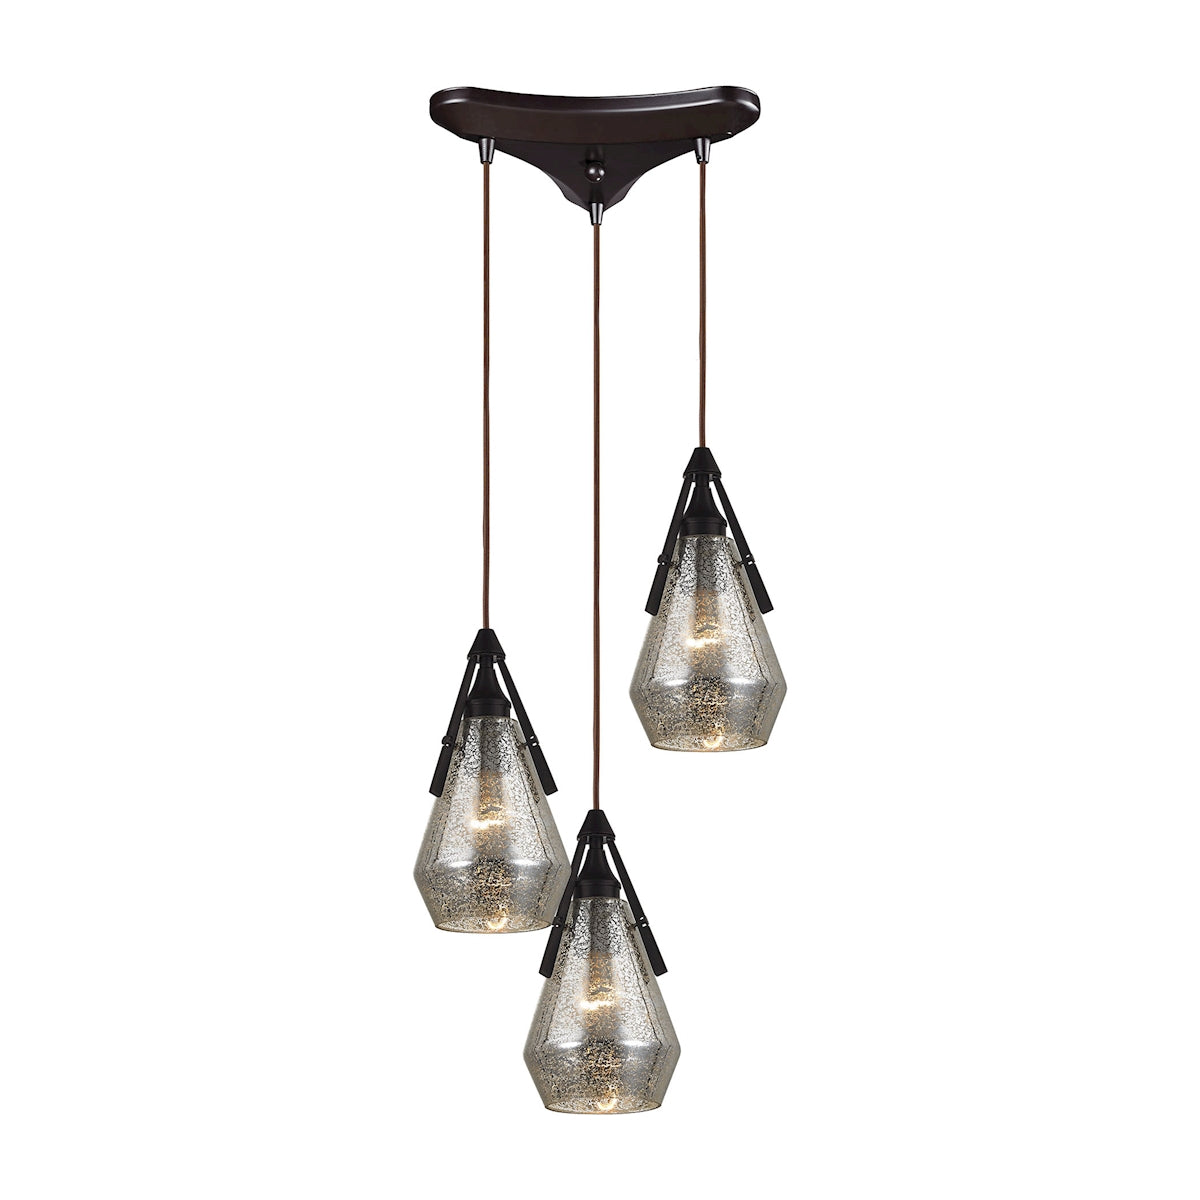 Duncan 3-Light Triangular Pendant Fixture in Oil Rubbed Bronze with Smoked Crackle Glass